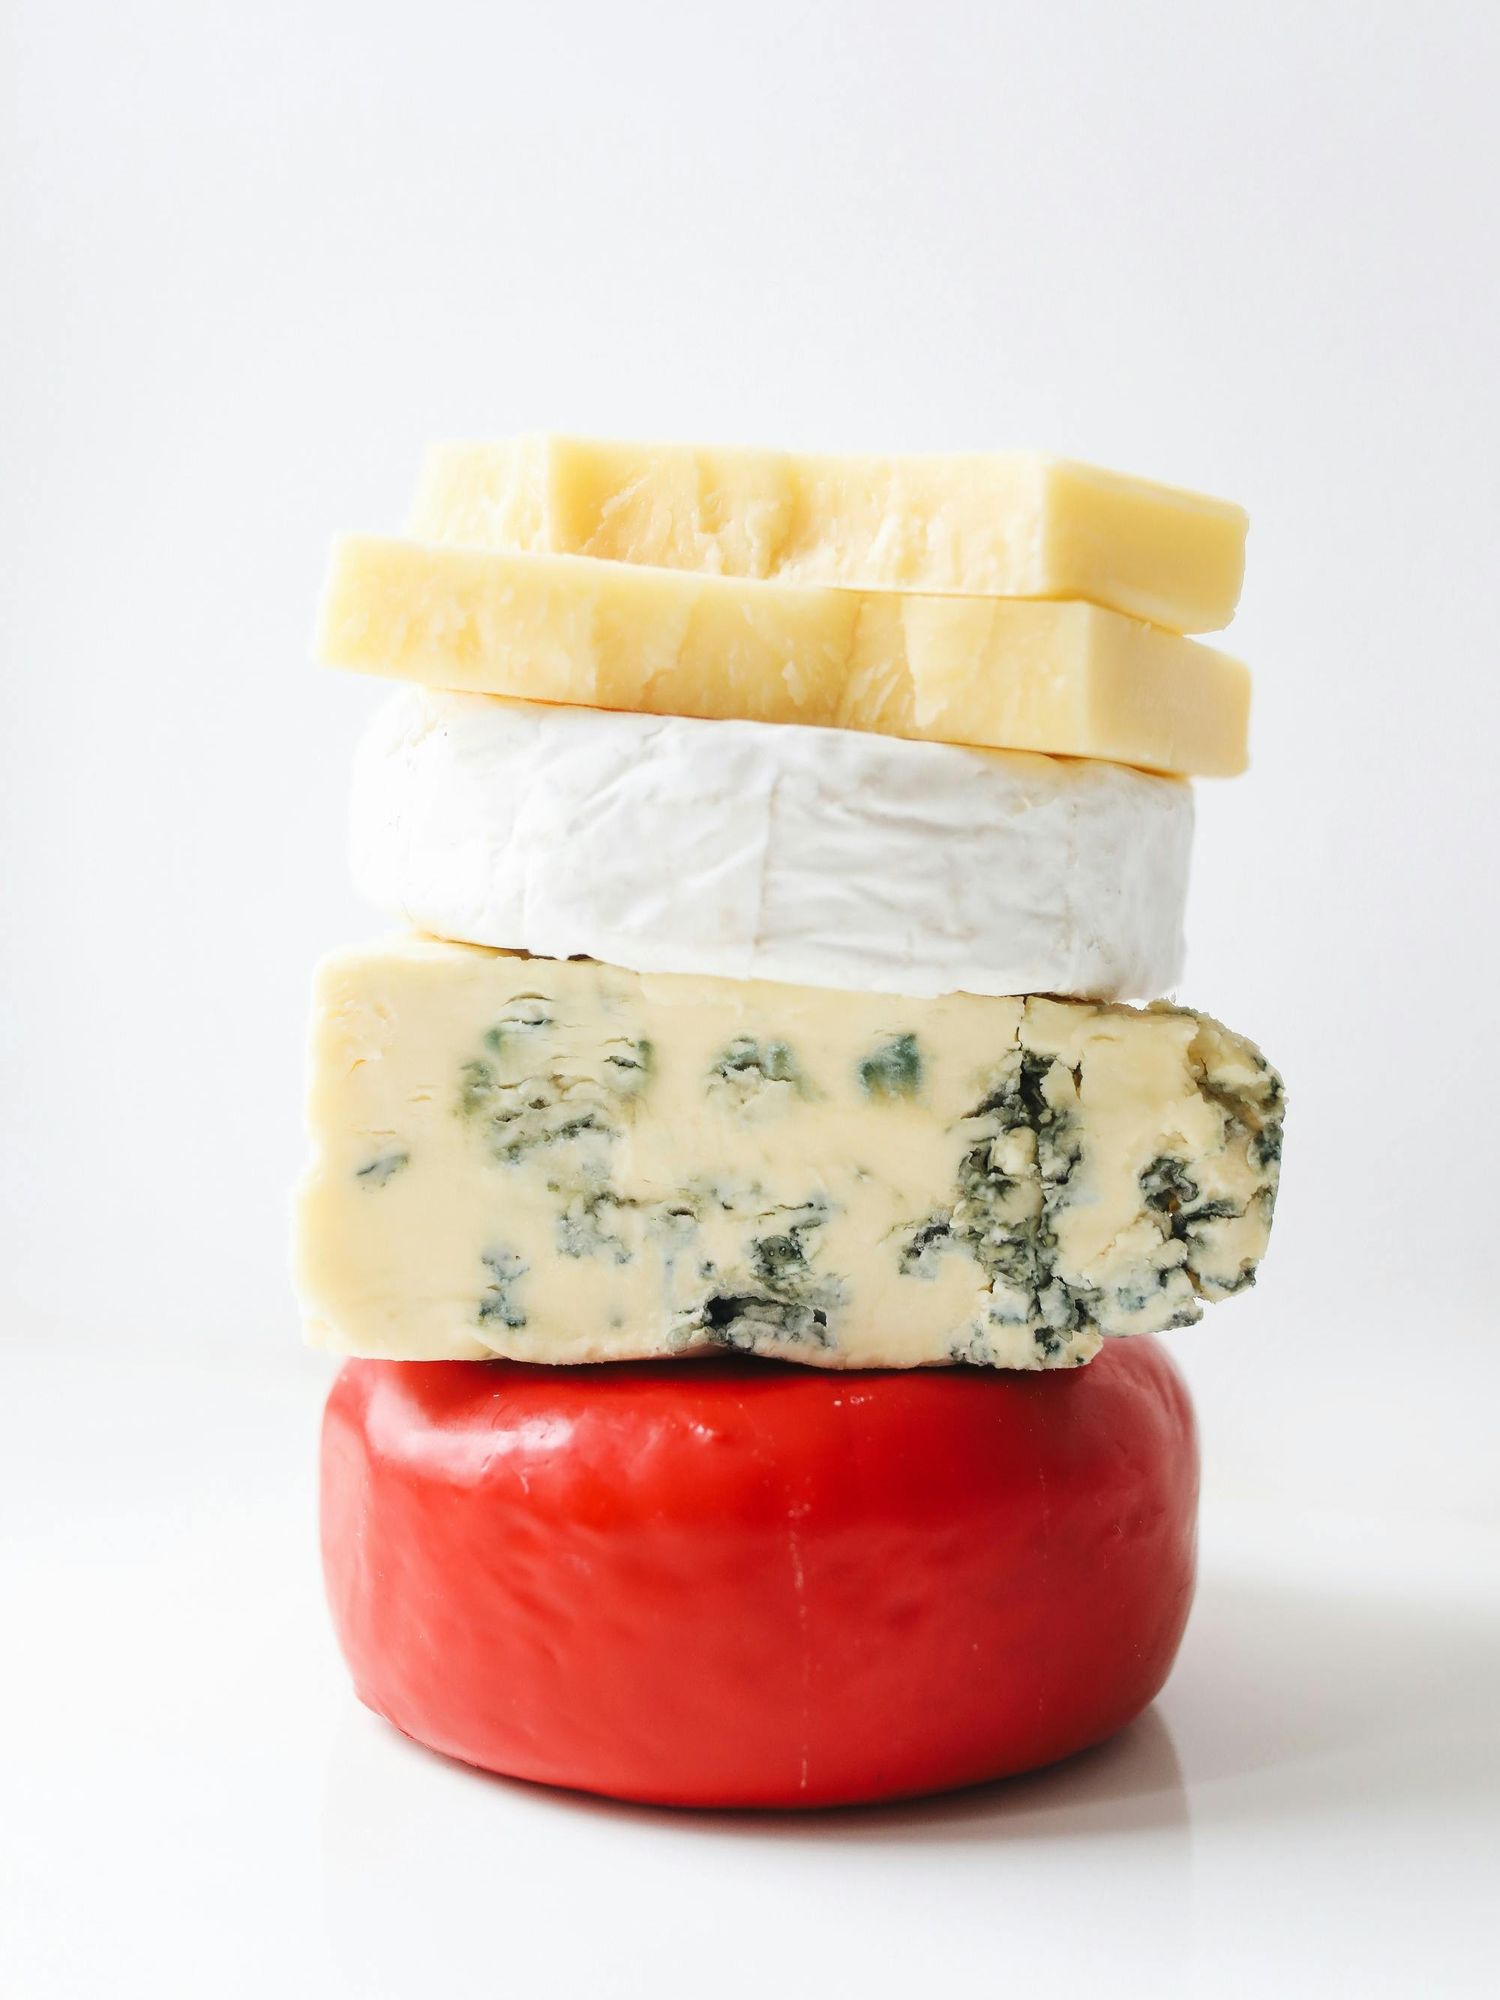 Is cheese considered clean eating?